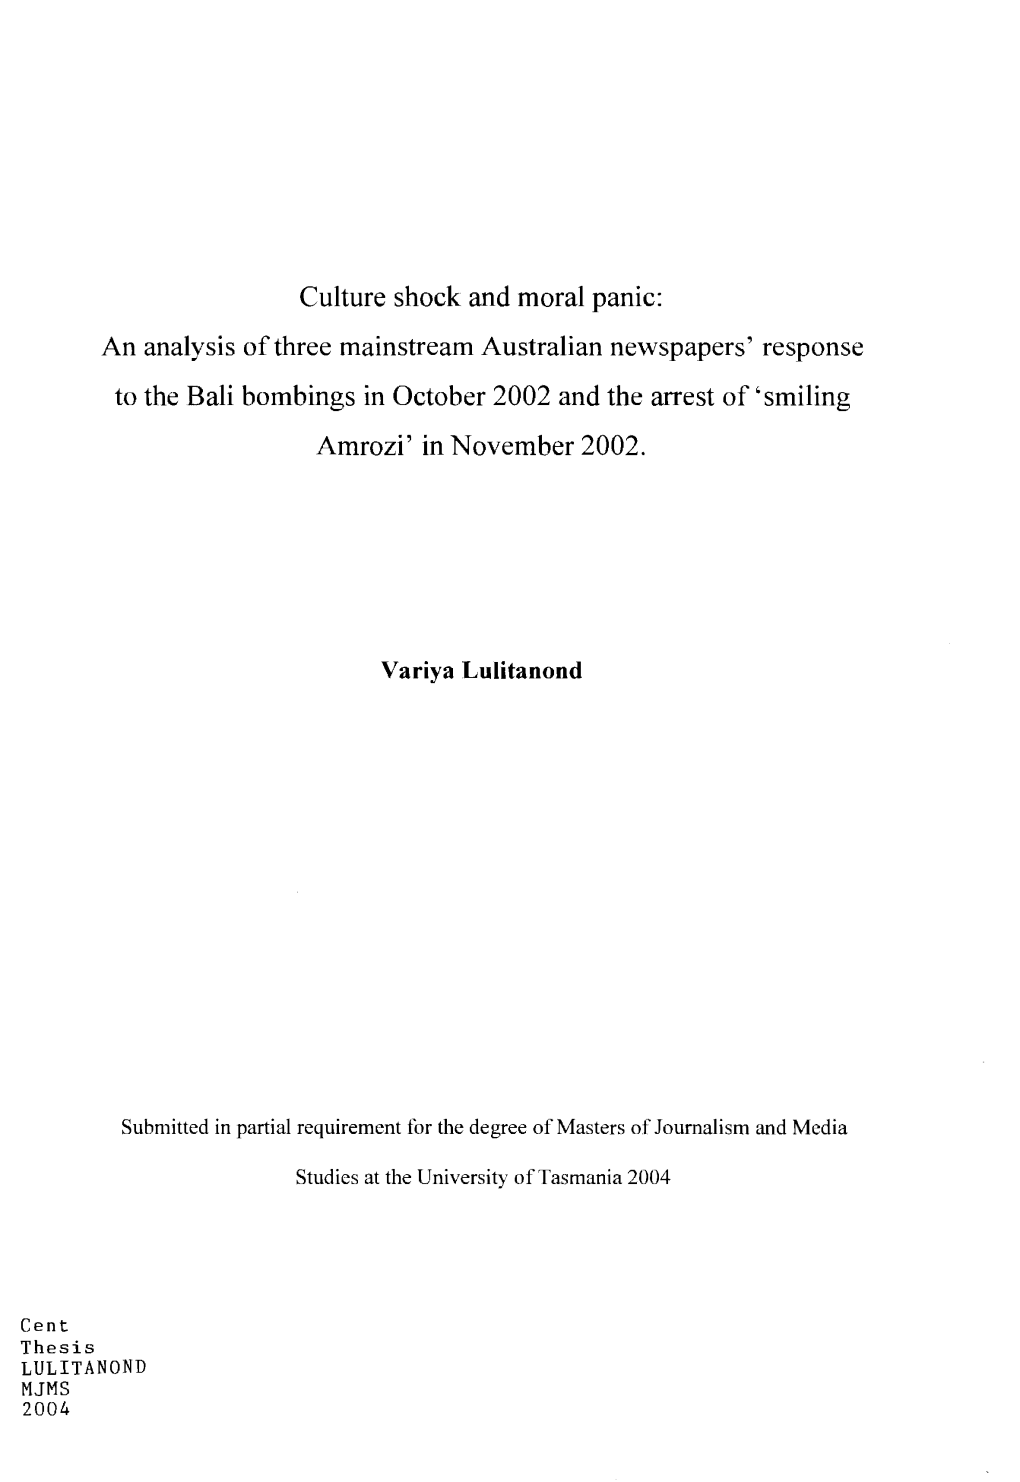 An Analysis of Three Mainstream Australian Newspapers' Response to the Bali Bombings in October 2002 and the Arrest Of' Smiling Amrozi' in November 2002